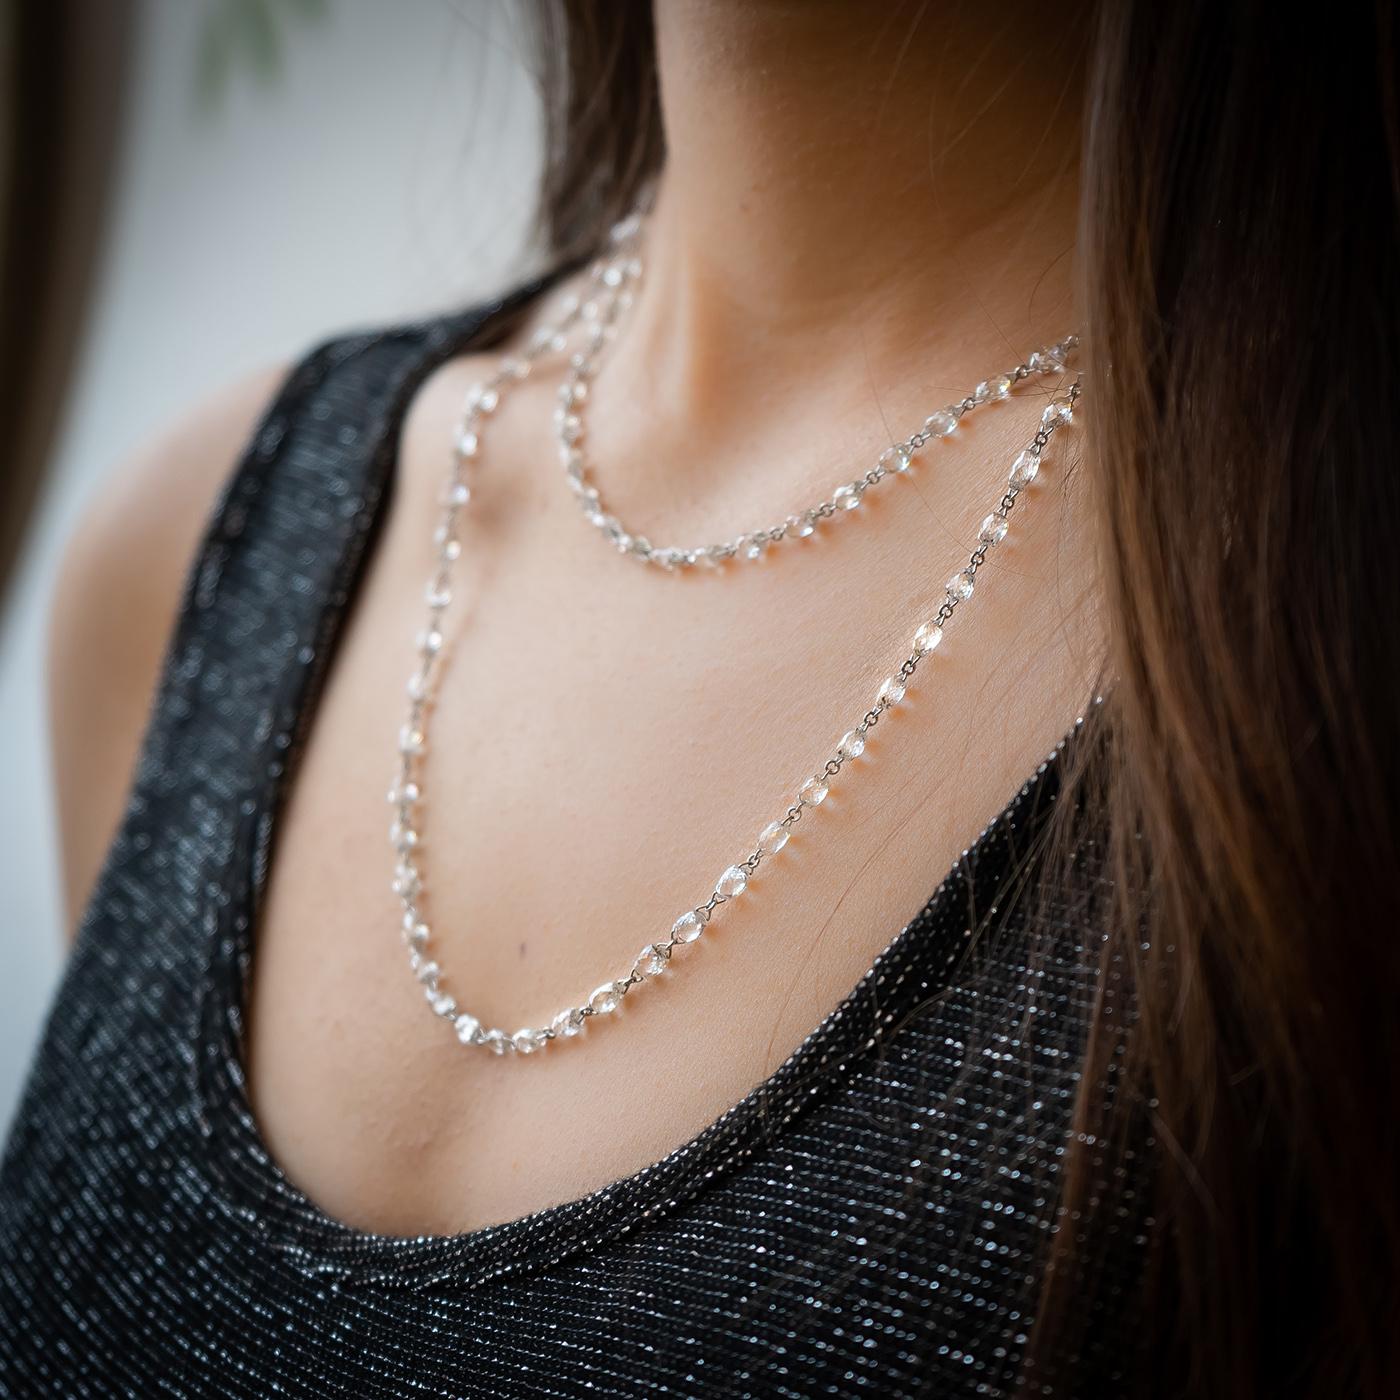 A modern briolette diamond long necklace, with 83, briolette-cut diamonds, weighing an estimated total of 36.83ct, with chain link between, mounted in 18ct white gold, with a white gold lobster clasp. This necklace sparkles when worn as the diamonds